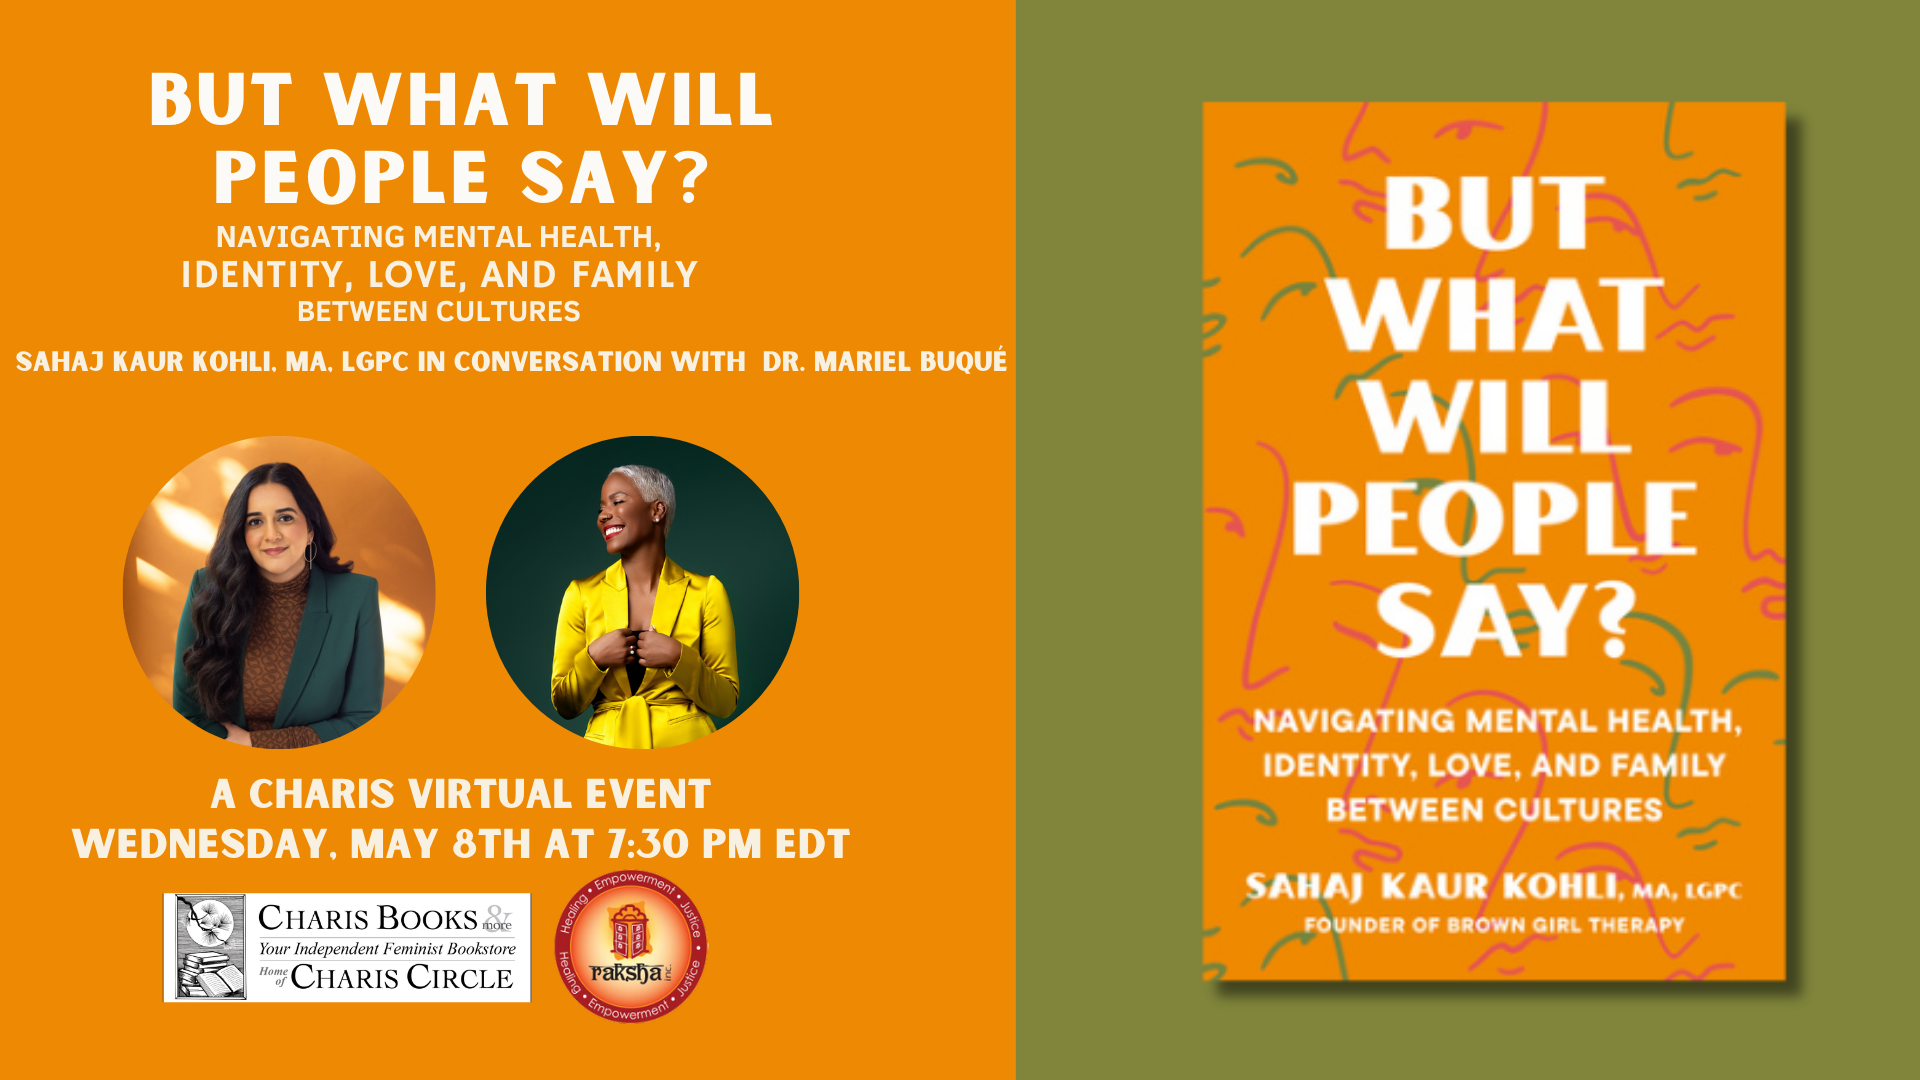 But What Will People Say?: Navigating Mental Health, Identity, Love, and Family Between Cultures--Sahaj Kaur Kohli in conversation with Dr. Mariel Buqué event cover photo